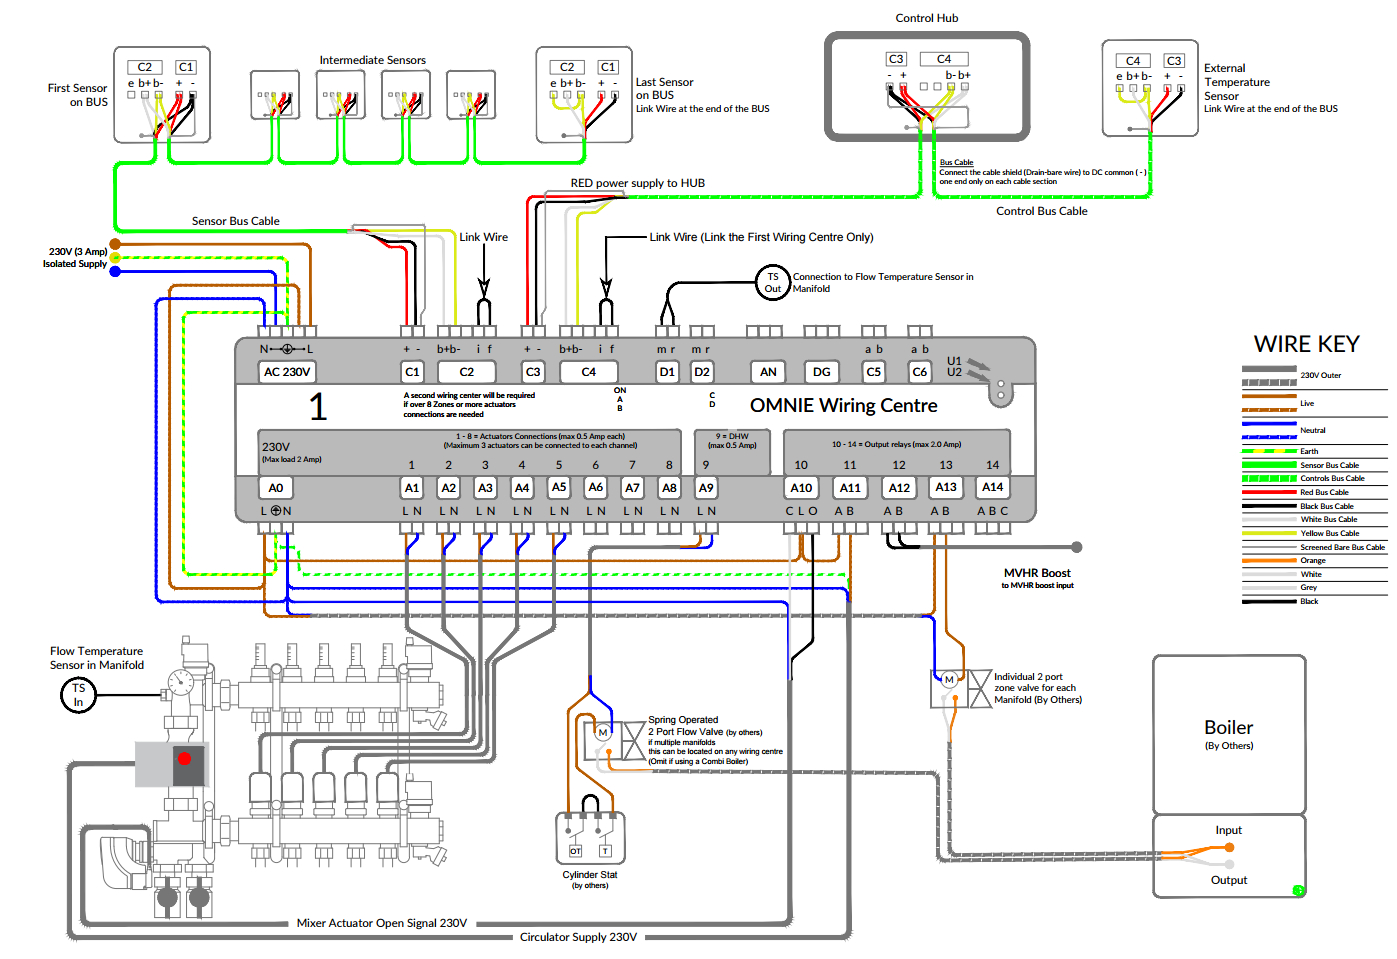 Omnie Network Controls With Electric Mixing Valve For Weather - Electric Heat Wiring Diagram